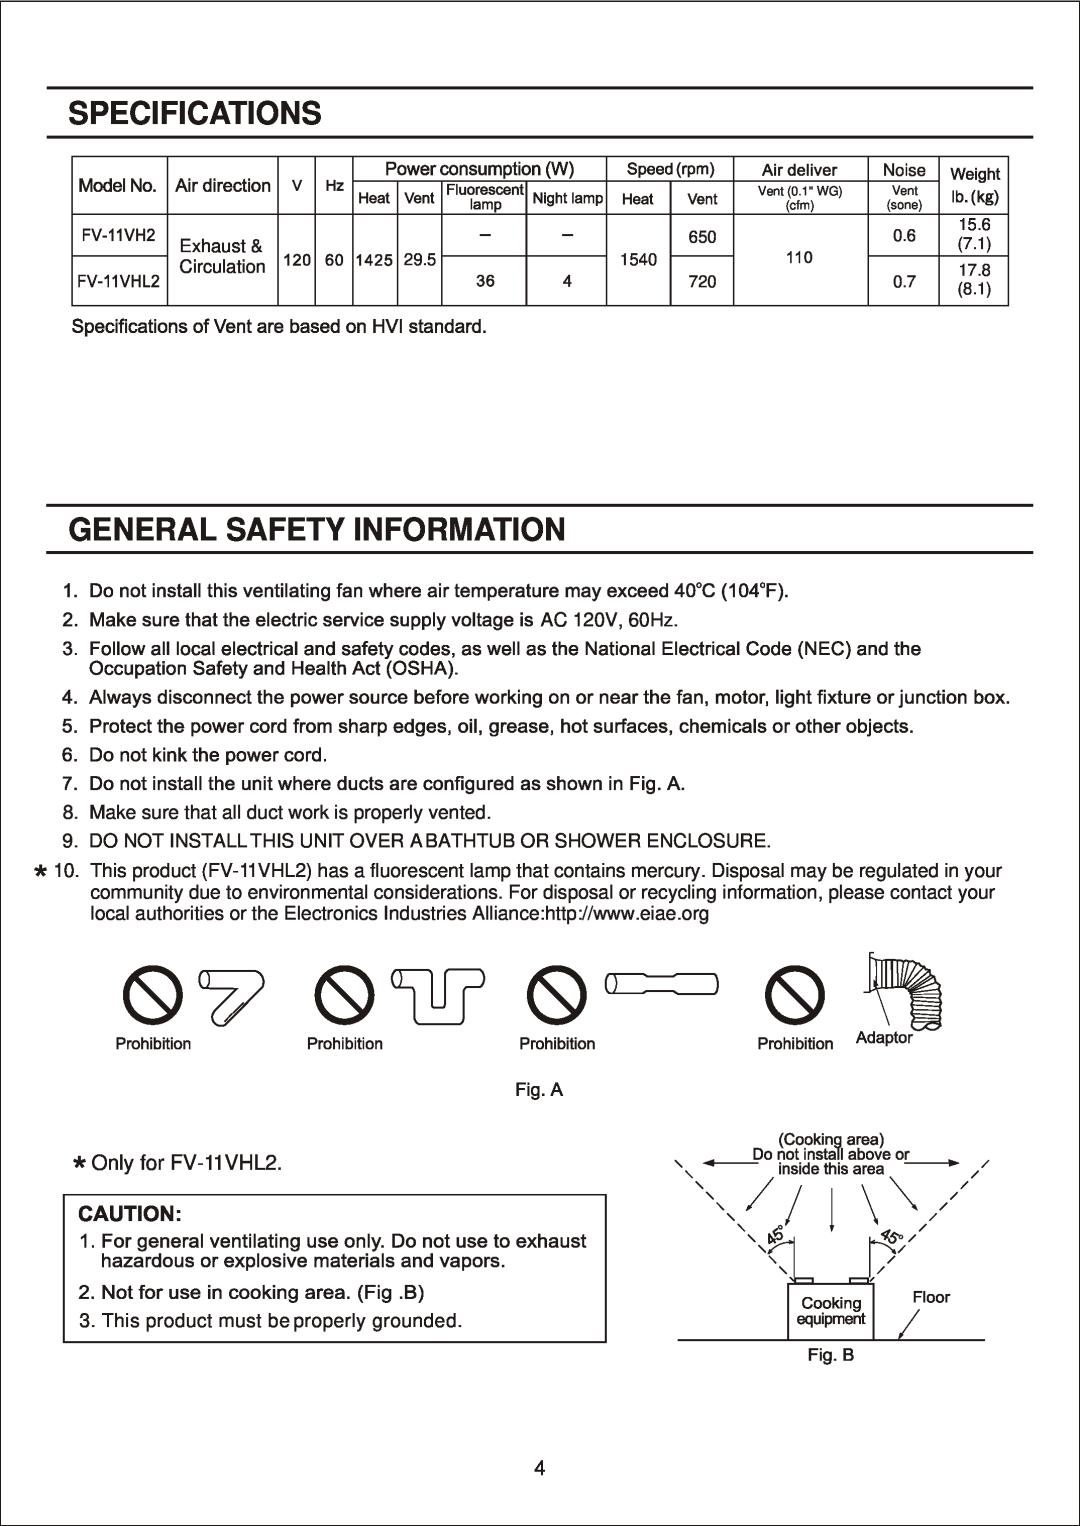 Panasonic FV-11VH2 manual Specifications, General Safety Information, Only for FV-11VHL2 